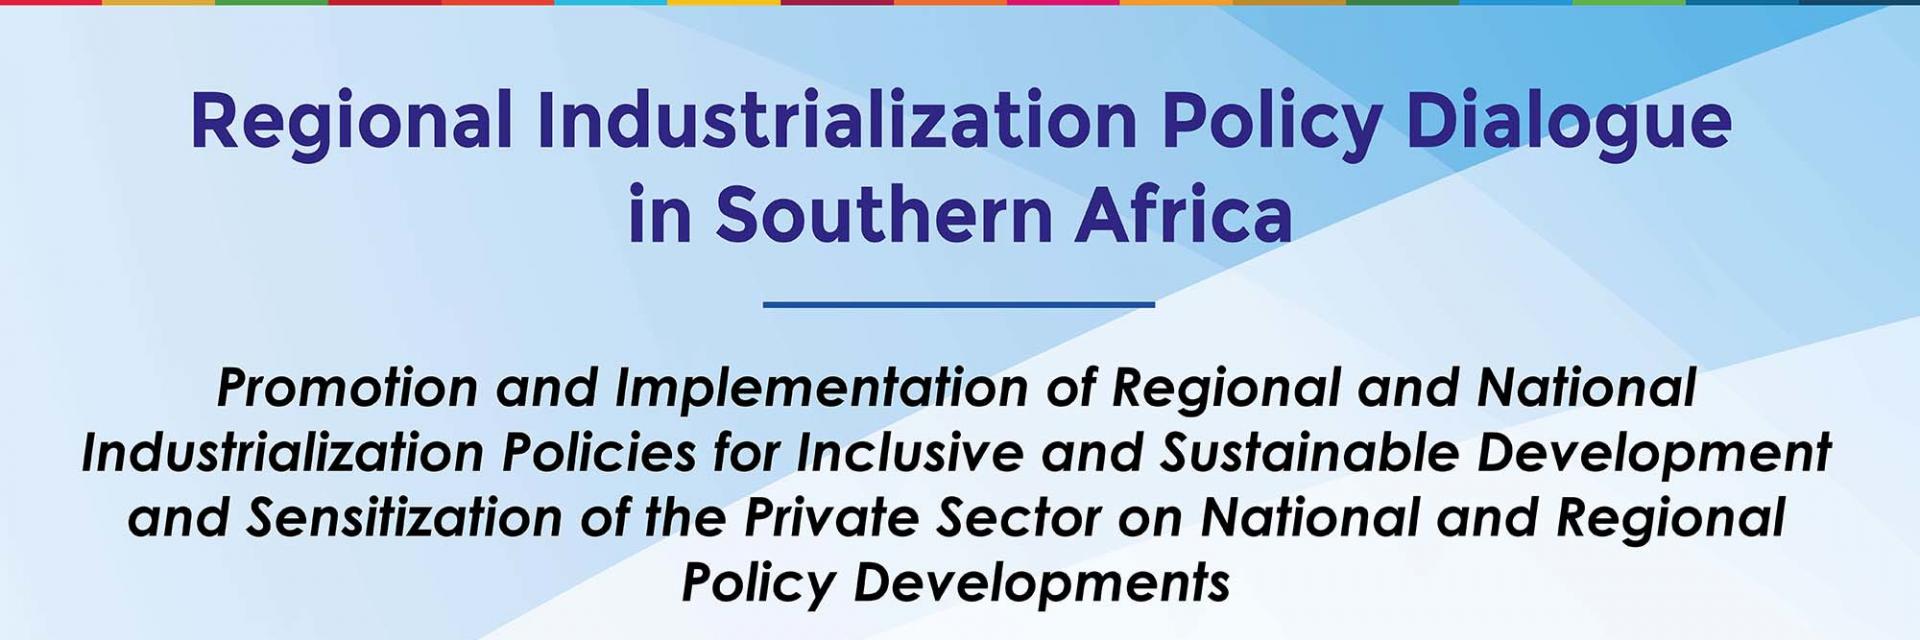 Regional Policy dialogue on the Promotion and Implementation of Regional and National Industrialization Policies for Inclusive and Sustainable Development in Southern Africa